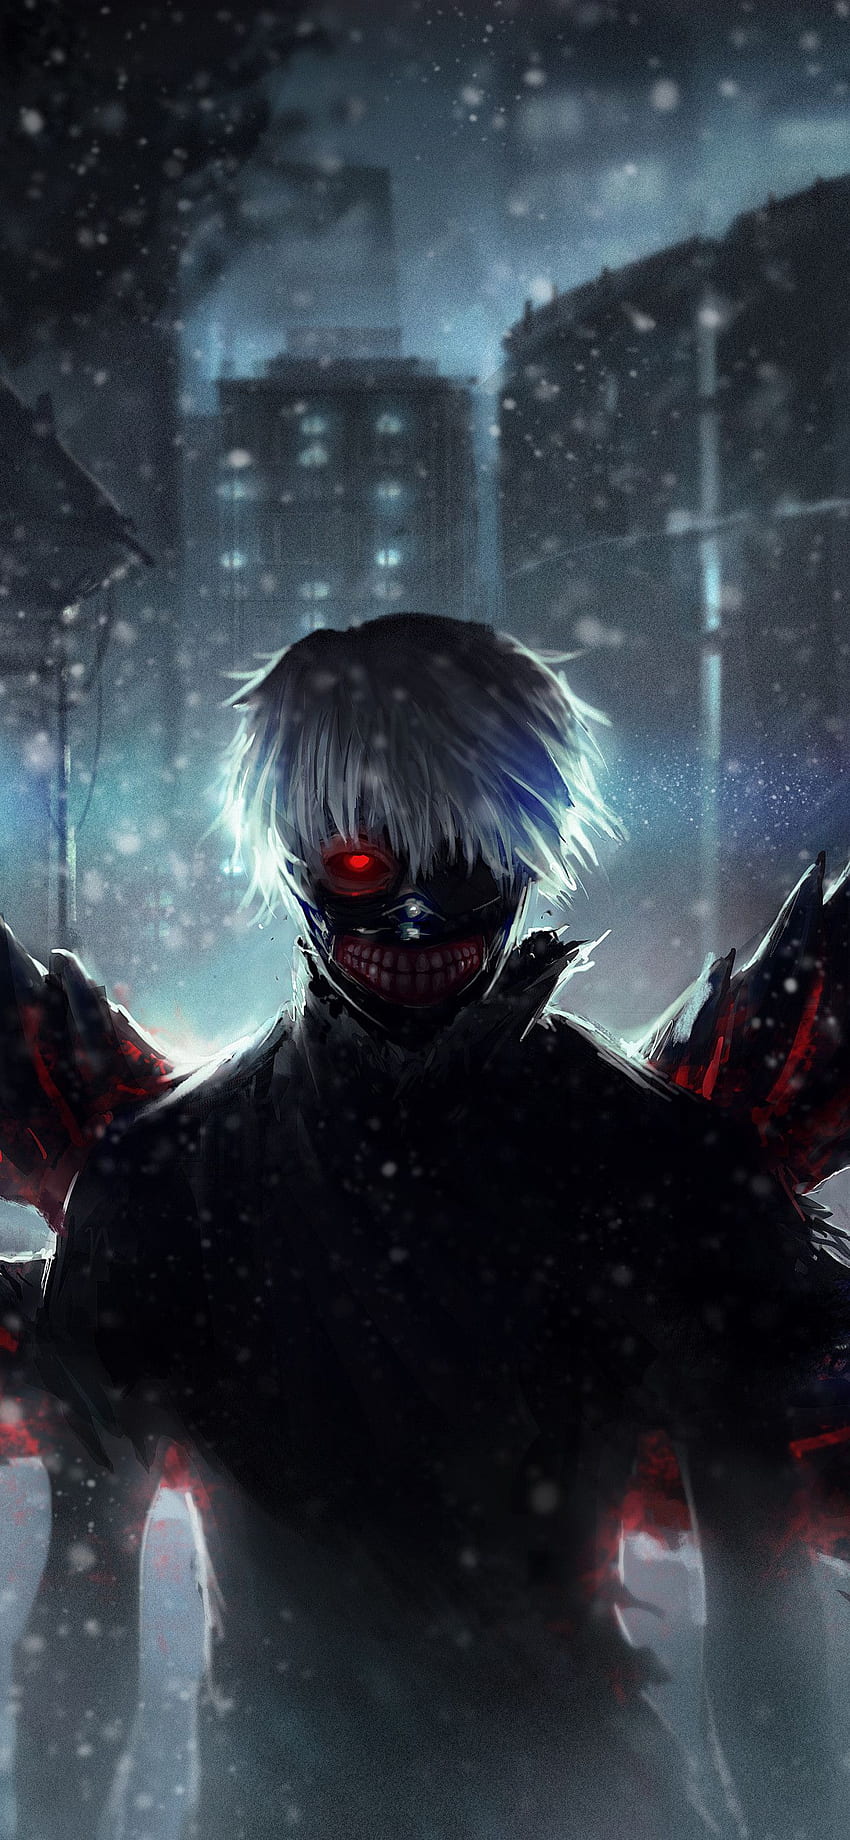 HD action anime wallpapers | Peakpx